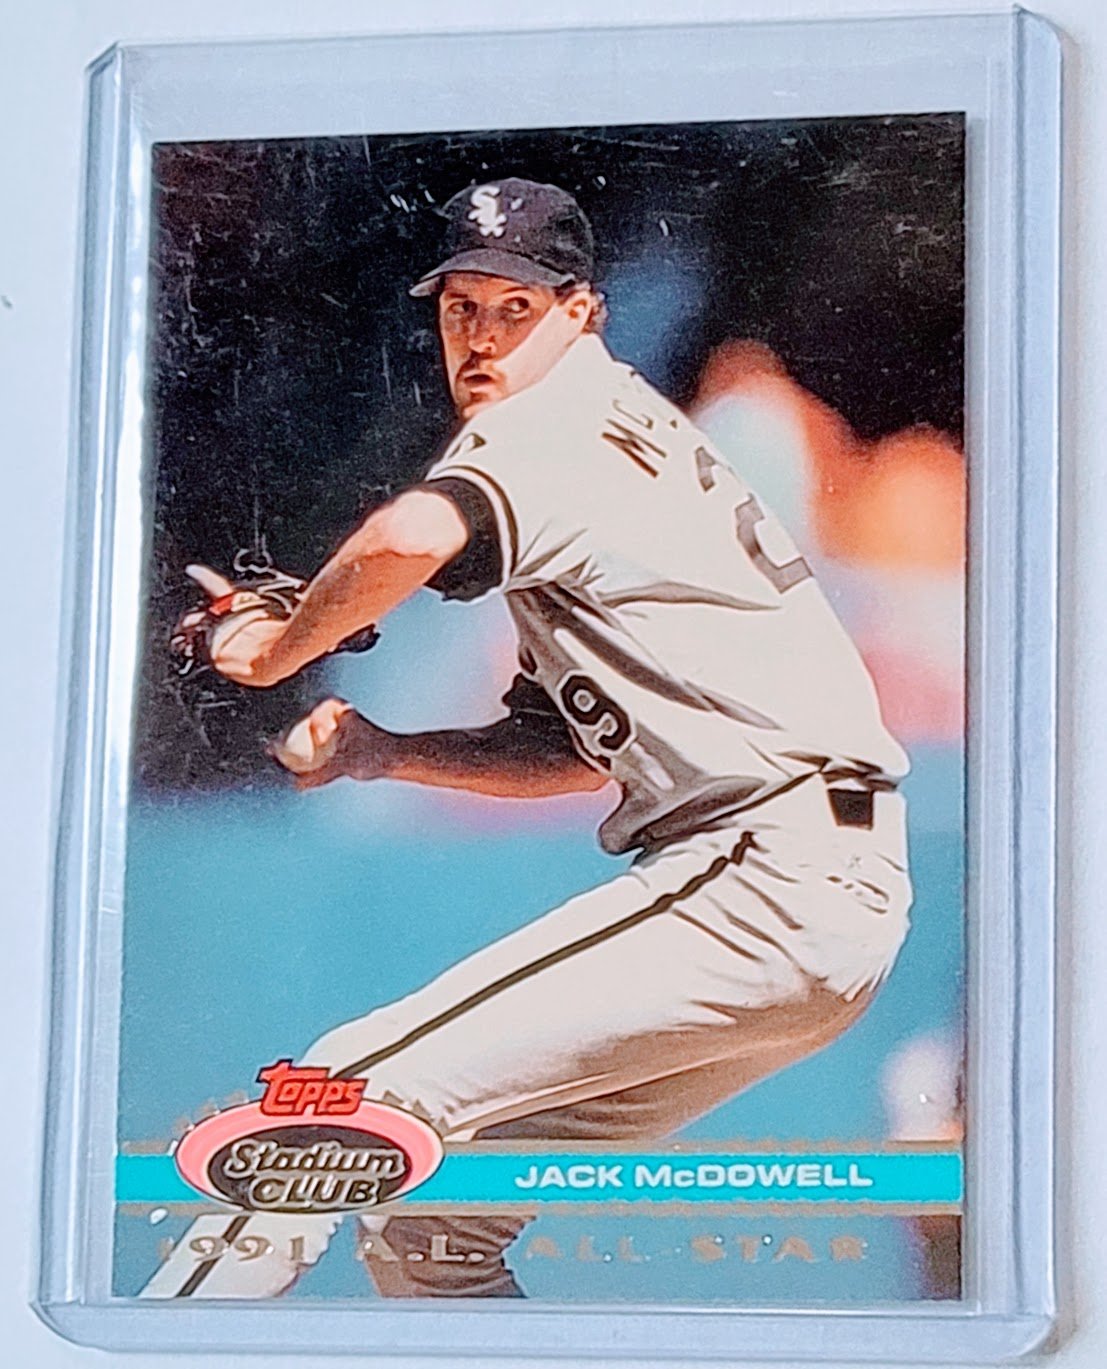 1992 Topps Stadium Club Dome Jack McDowell 1991 All Star MLB Baseball Trading Card TPTV simple Xclusive Collectibles   